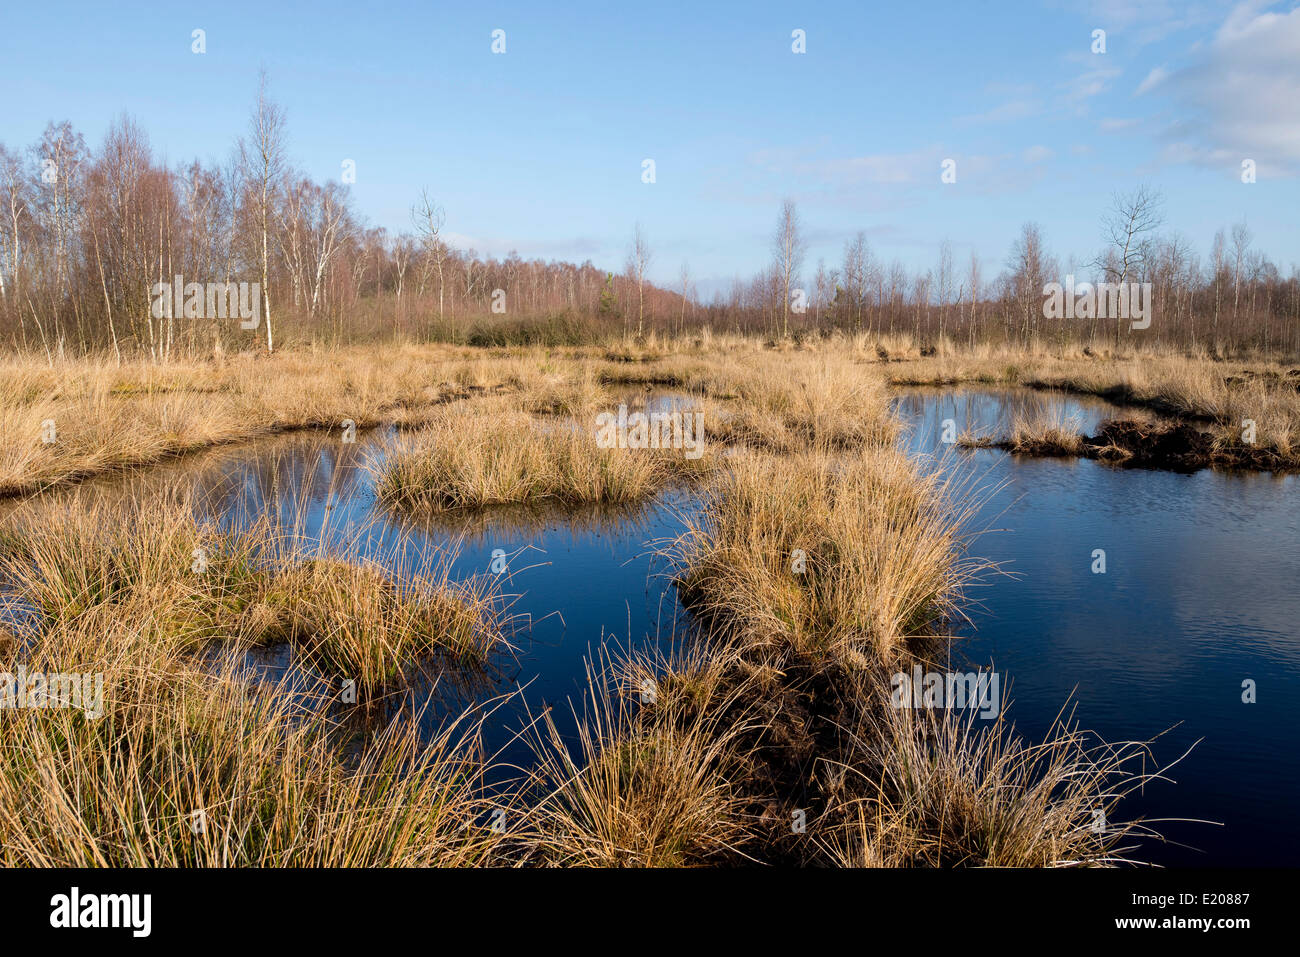 Renatured moor area where peat was cut, Großes Moor Nature Reserve, near Gifhorn, Lower Saxony, Germany Stock Photo